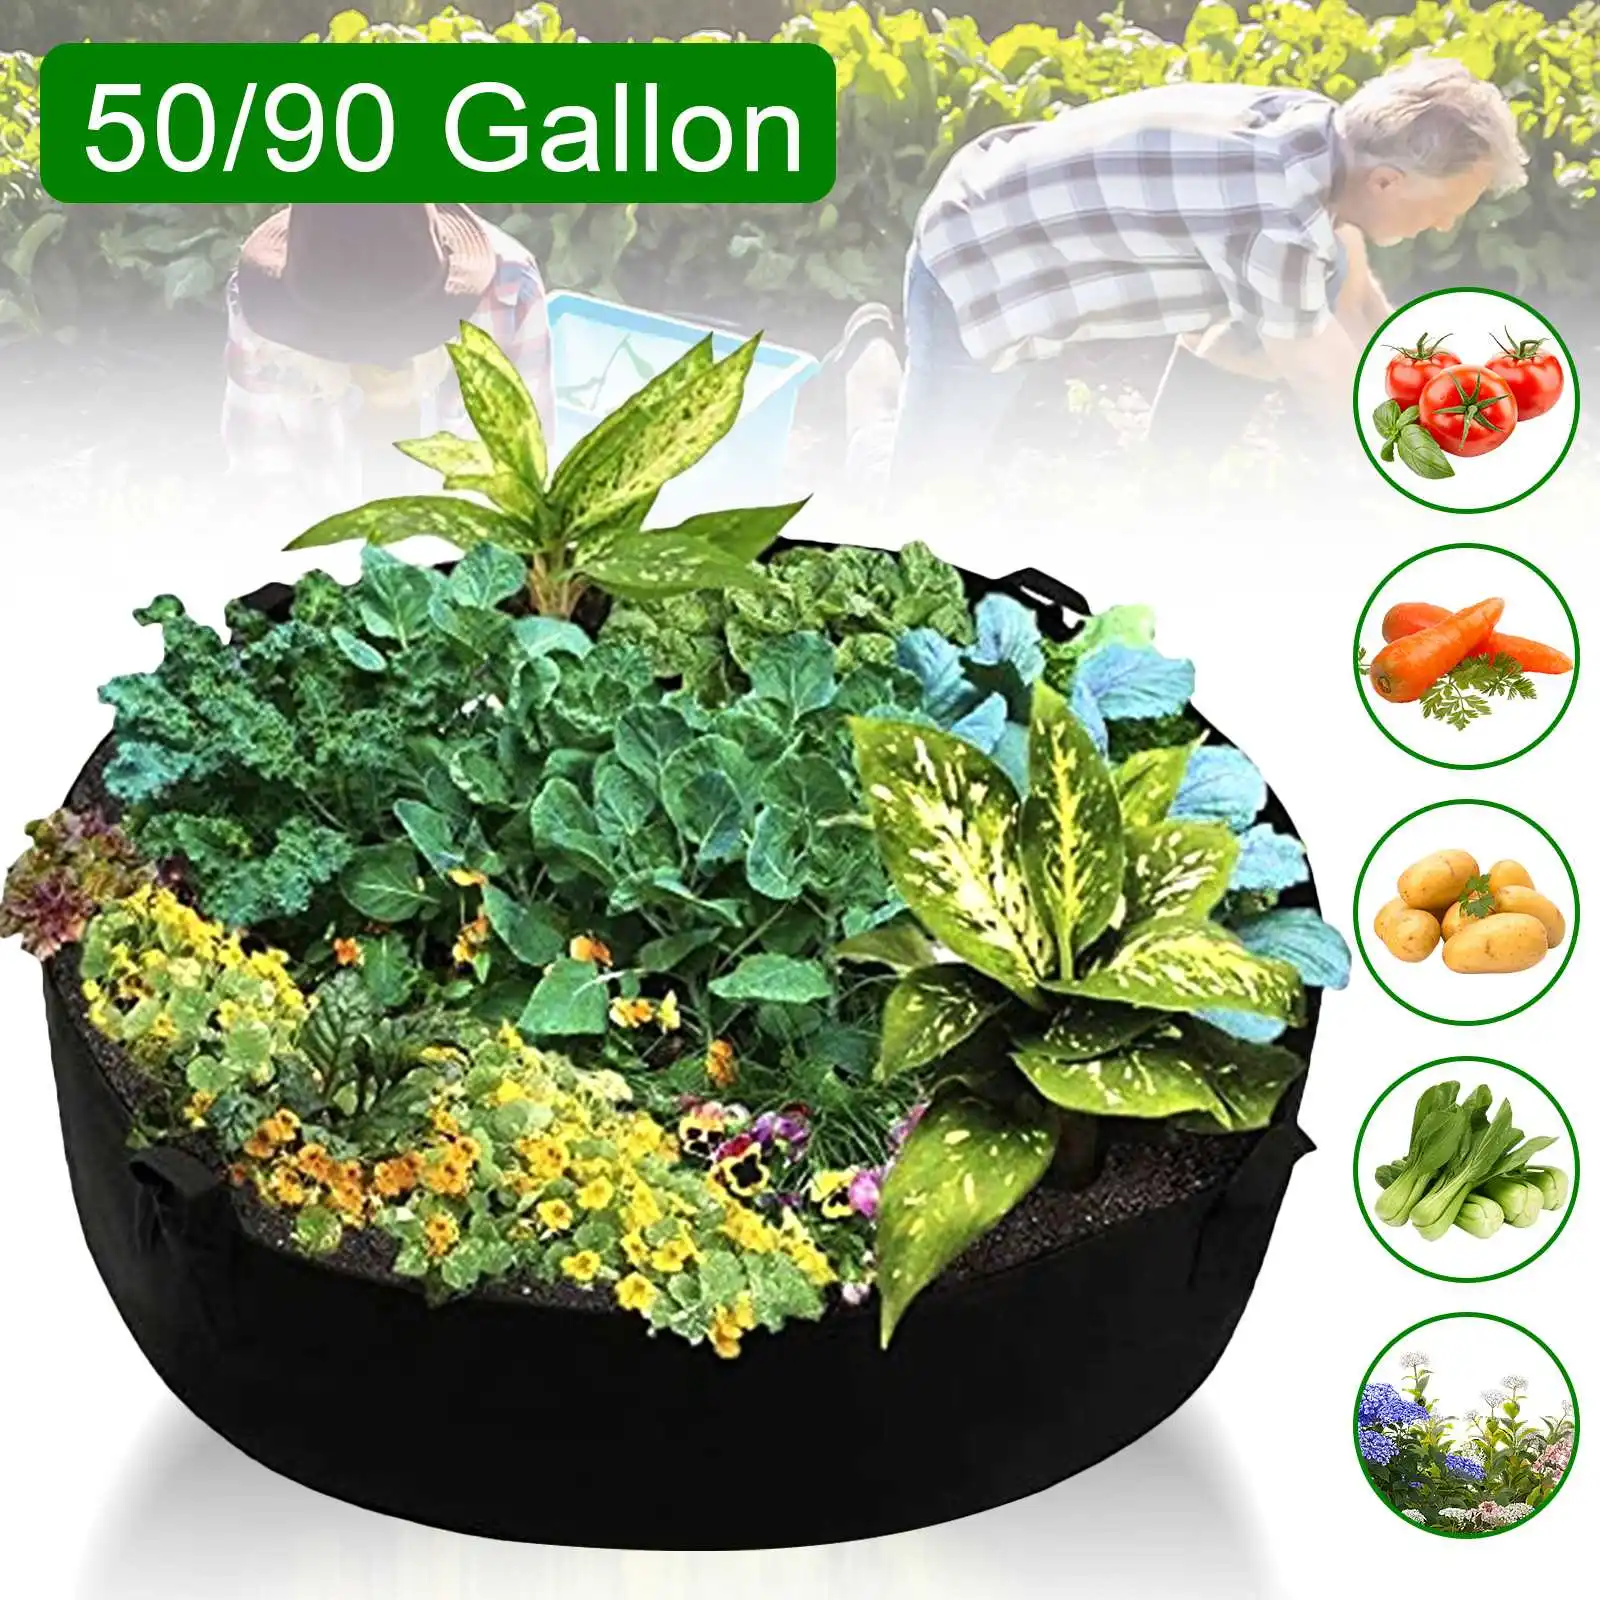 

50/100 Gallon Garden Bed Round Planting Container Fabric Plant Pot Raised Grow Bags Breathable Felt Fabric Planter Nursery Pot